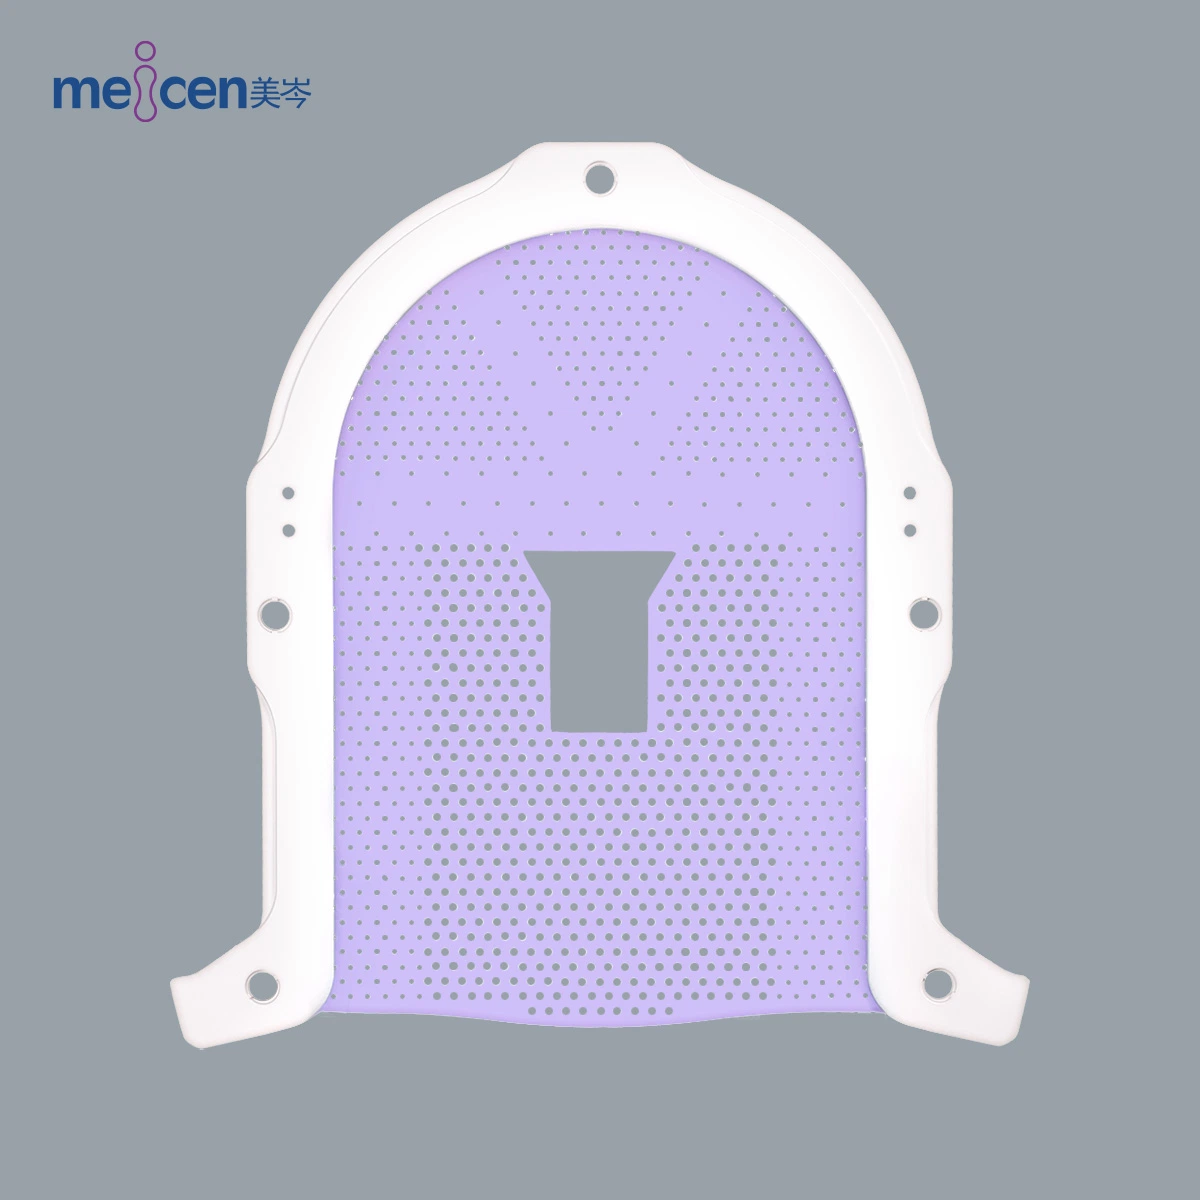 Meicen Violet S-Frame Thermoplastic Radiotherapy Mask Open Face for Cancer Therapy